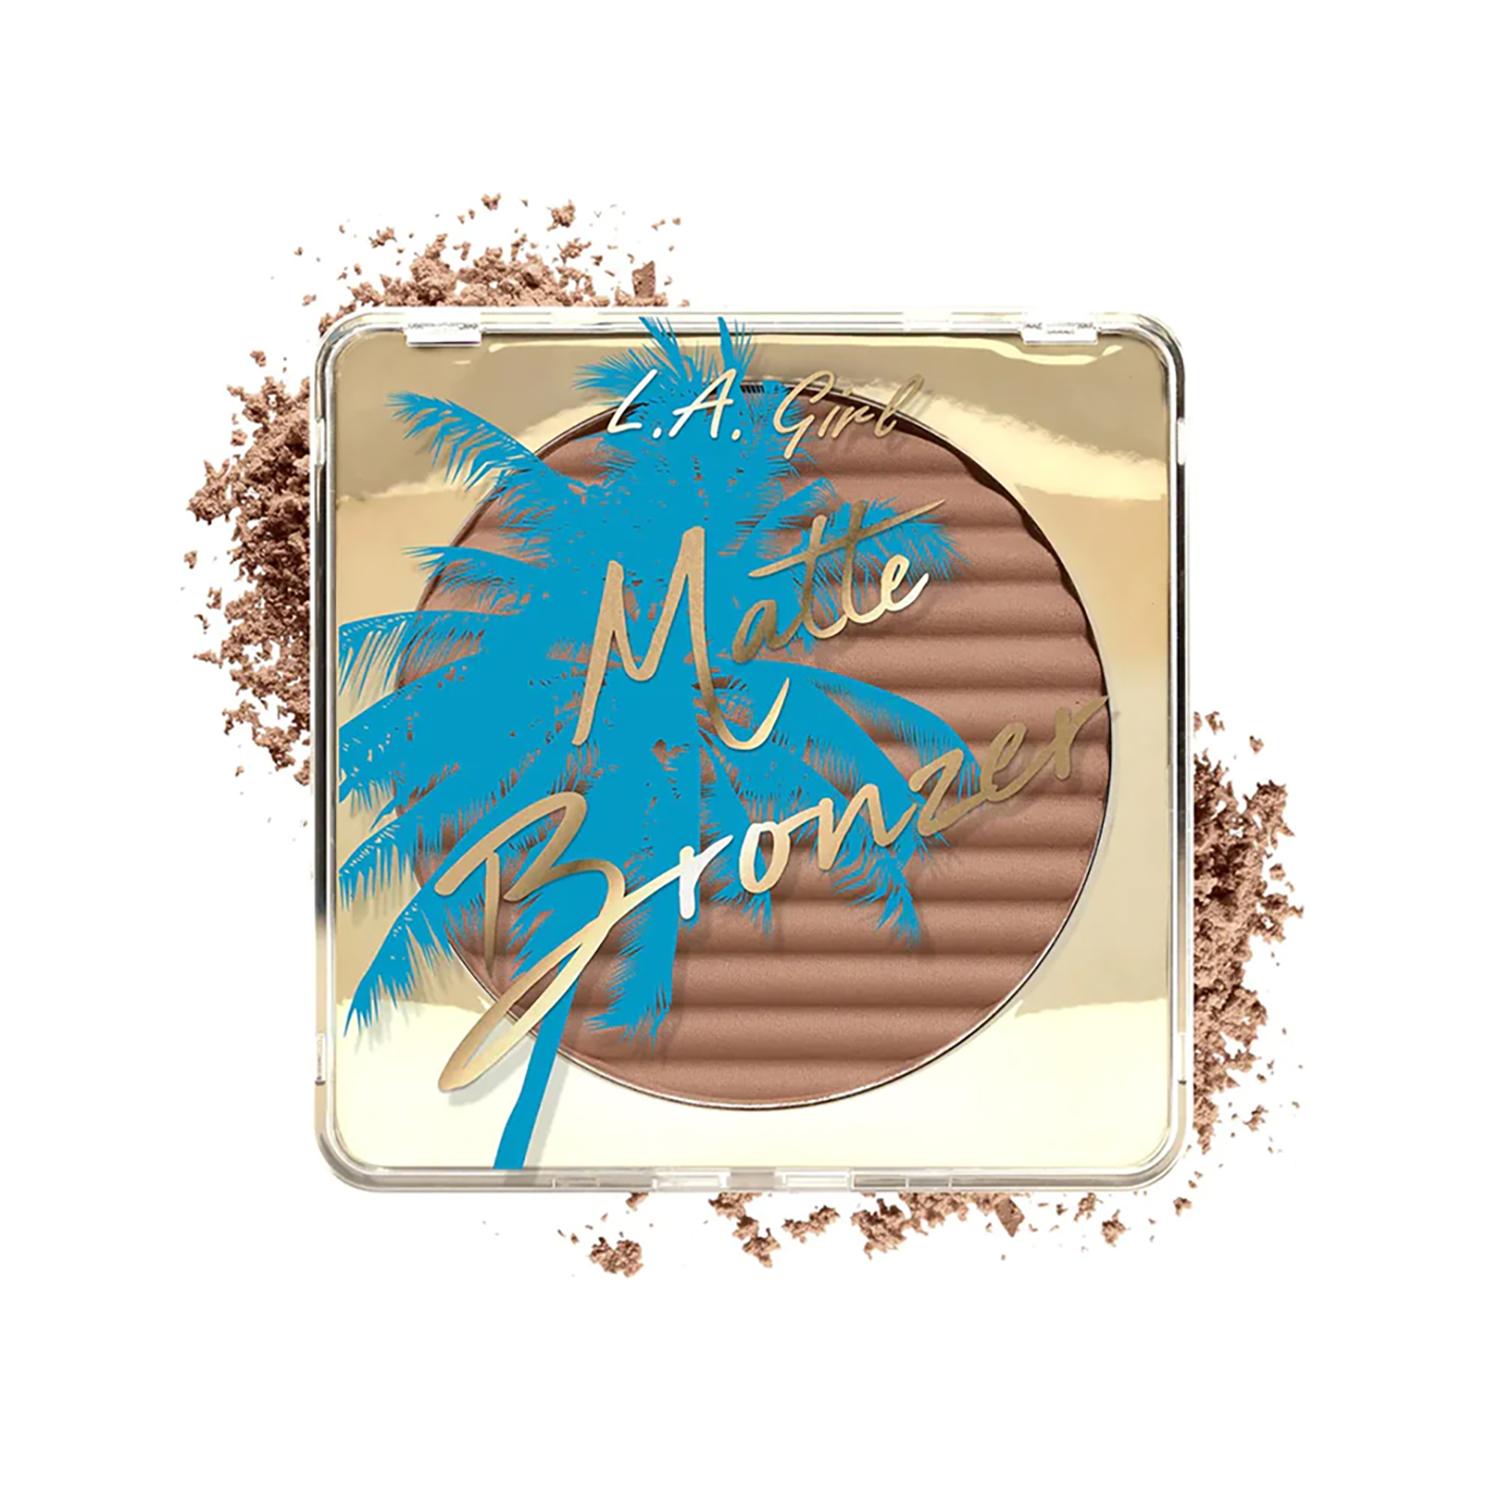 L.A. Girl | L.A. Girl Matte Bronzer - Back To The Beach (15g)